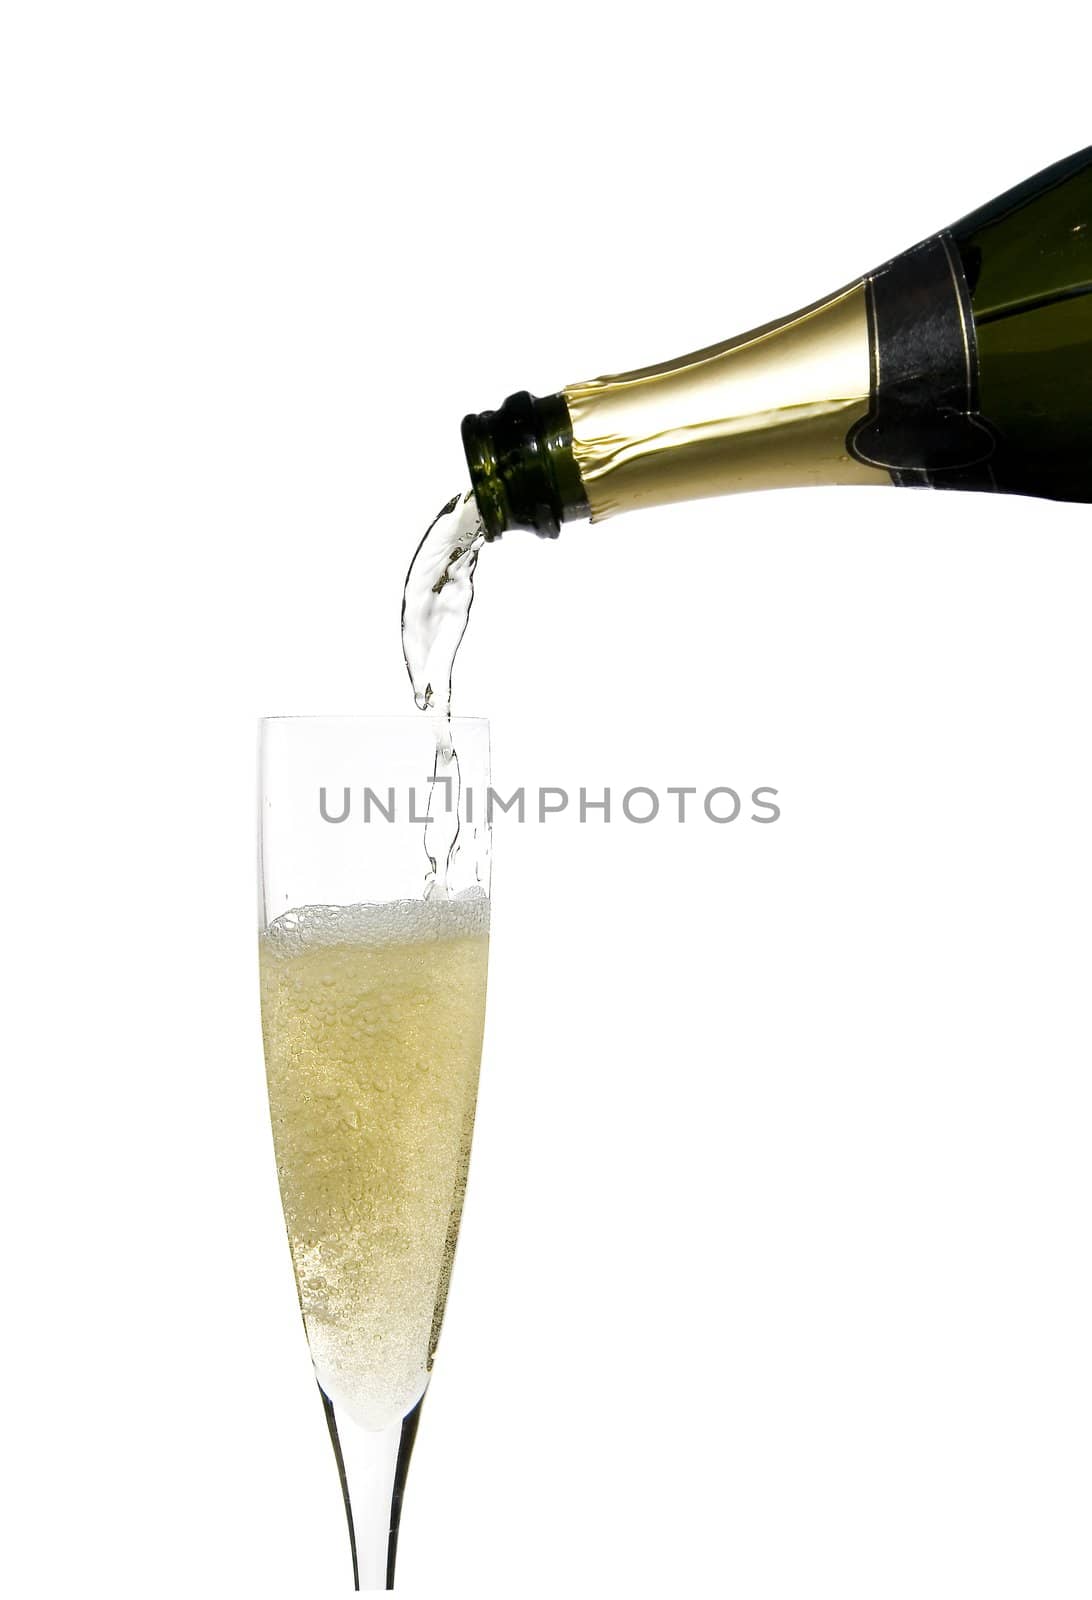 filling a glass cup with champagne wine isolated on withe background